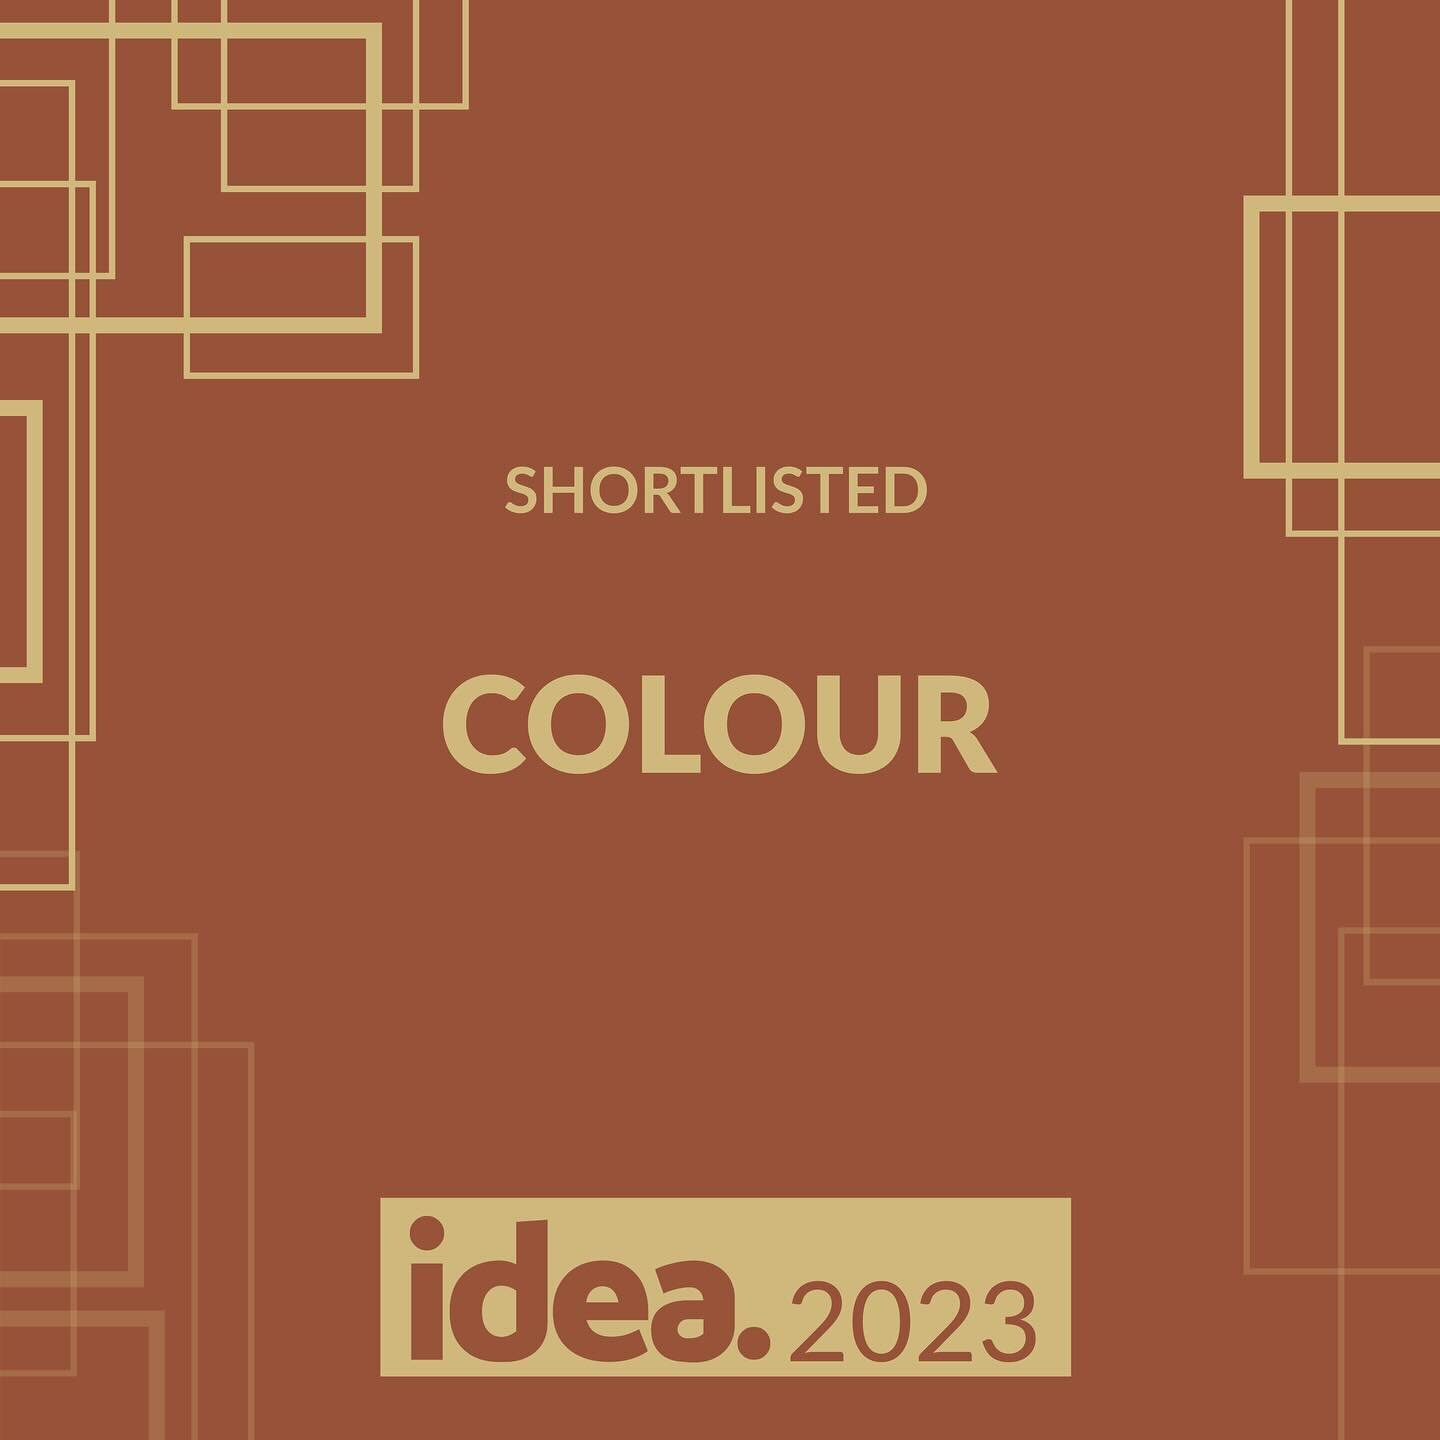 SHORTLISTED - Colour Award 
Interior Design Excellence Awards (IDEA) Australia

Thanks to a wonderful Client @gsdiamonds who with bravery and business savvy are evolving their retail brand into the future. 
Great as always to work with @showcaseanddi